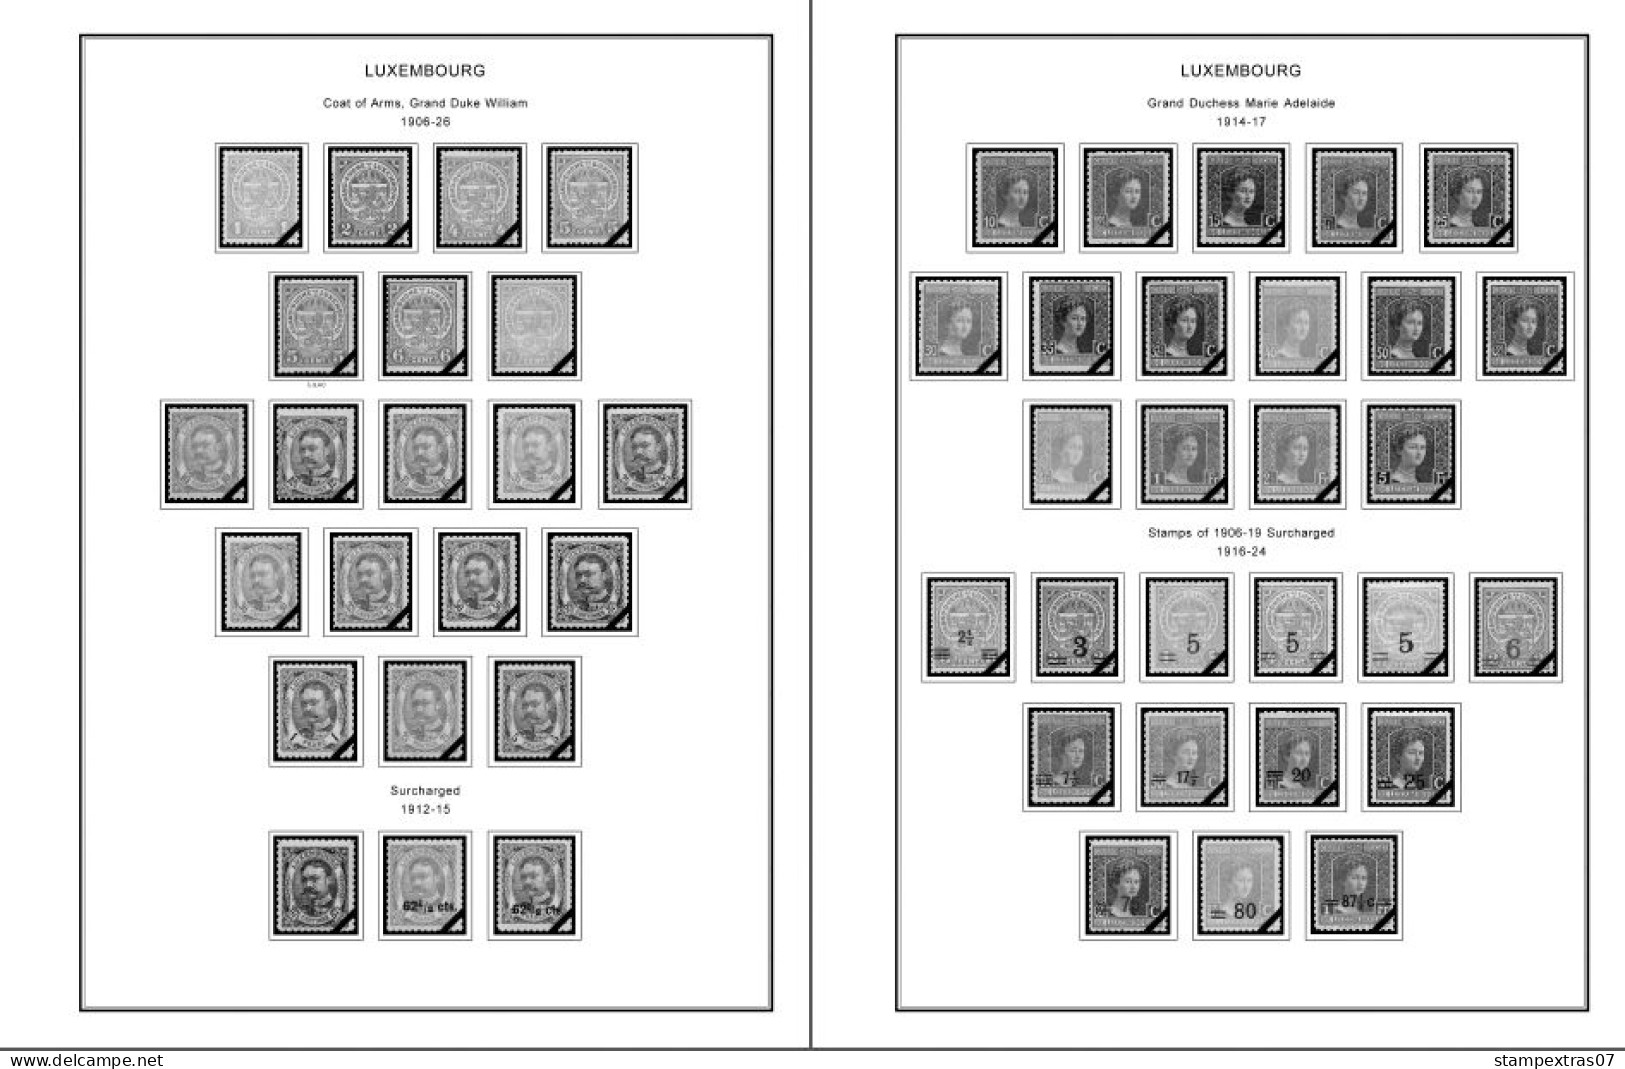 LUXEMBOURG 1852-2010 + 2011-2020 STAMP ALBUM PAGES (244 B&w Illustrated Pages) - Inglese